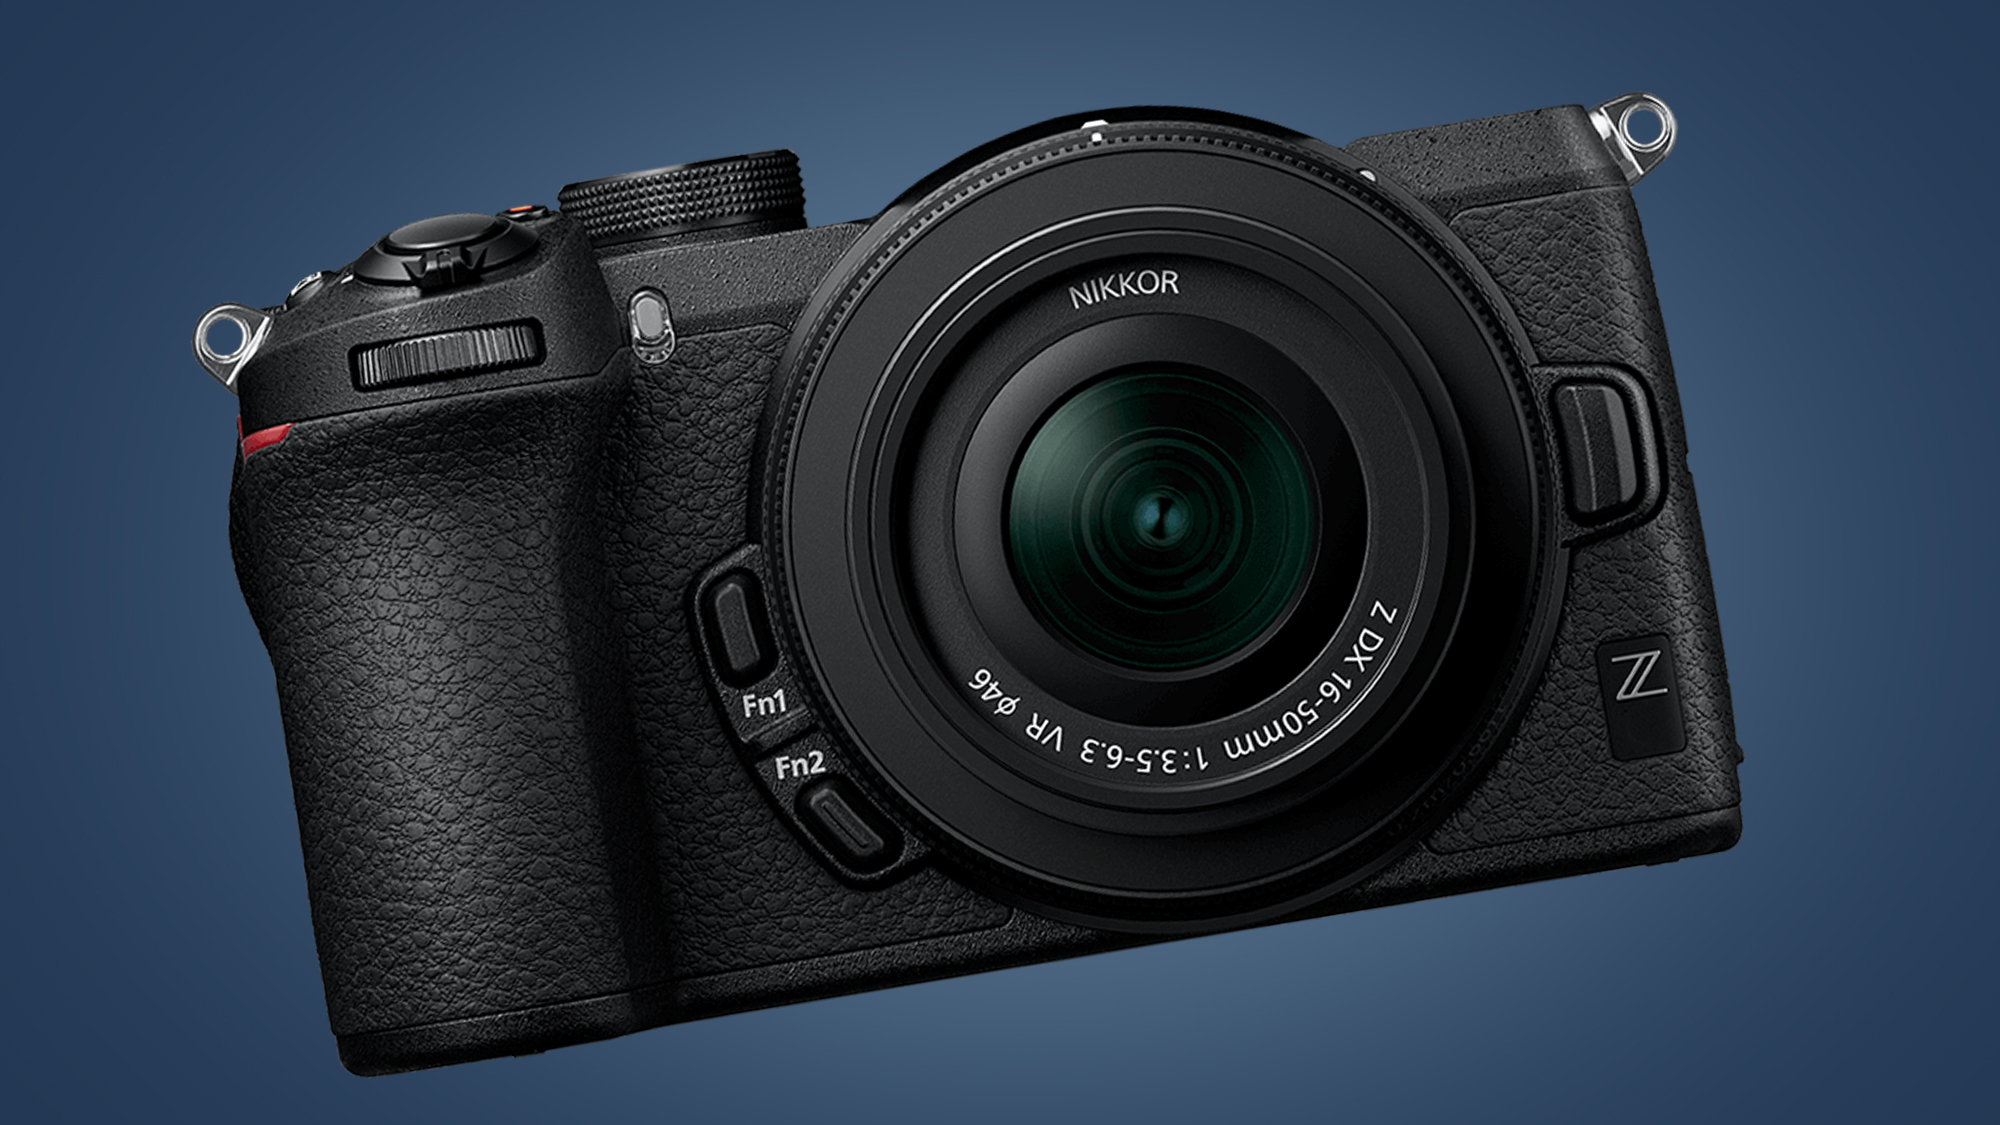 Super-compact Nikon Z30 mirrorless camera tipped to finally launch soon